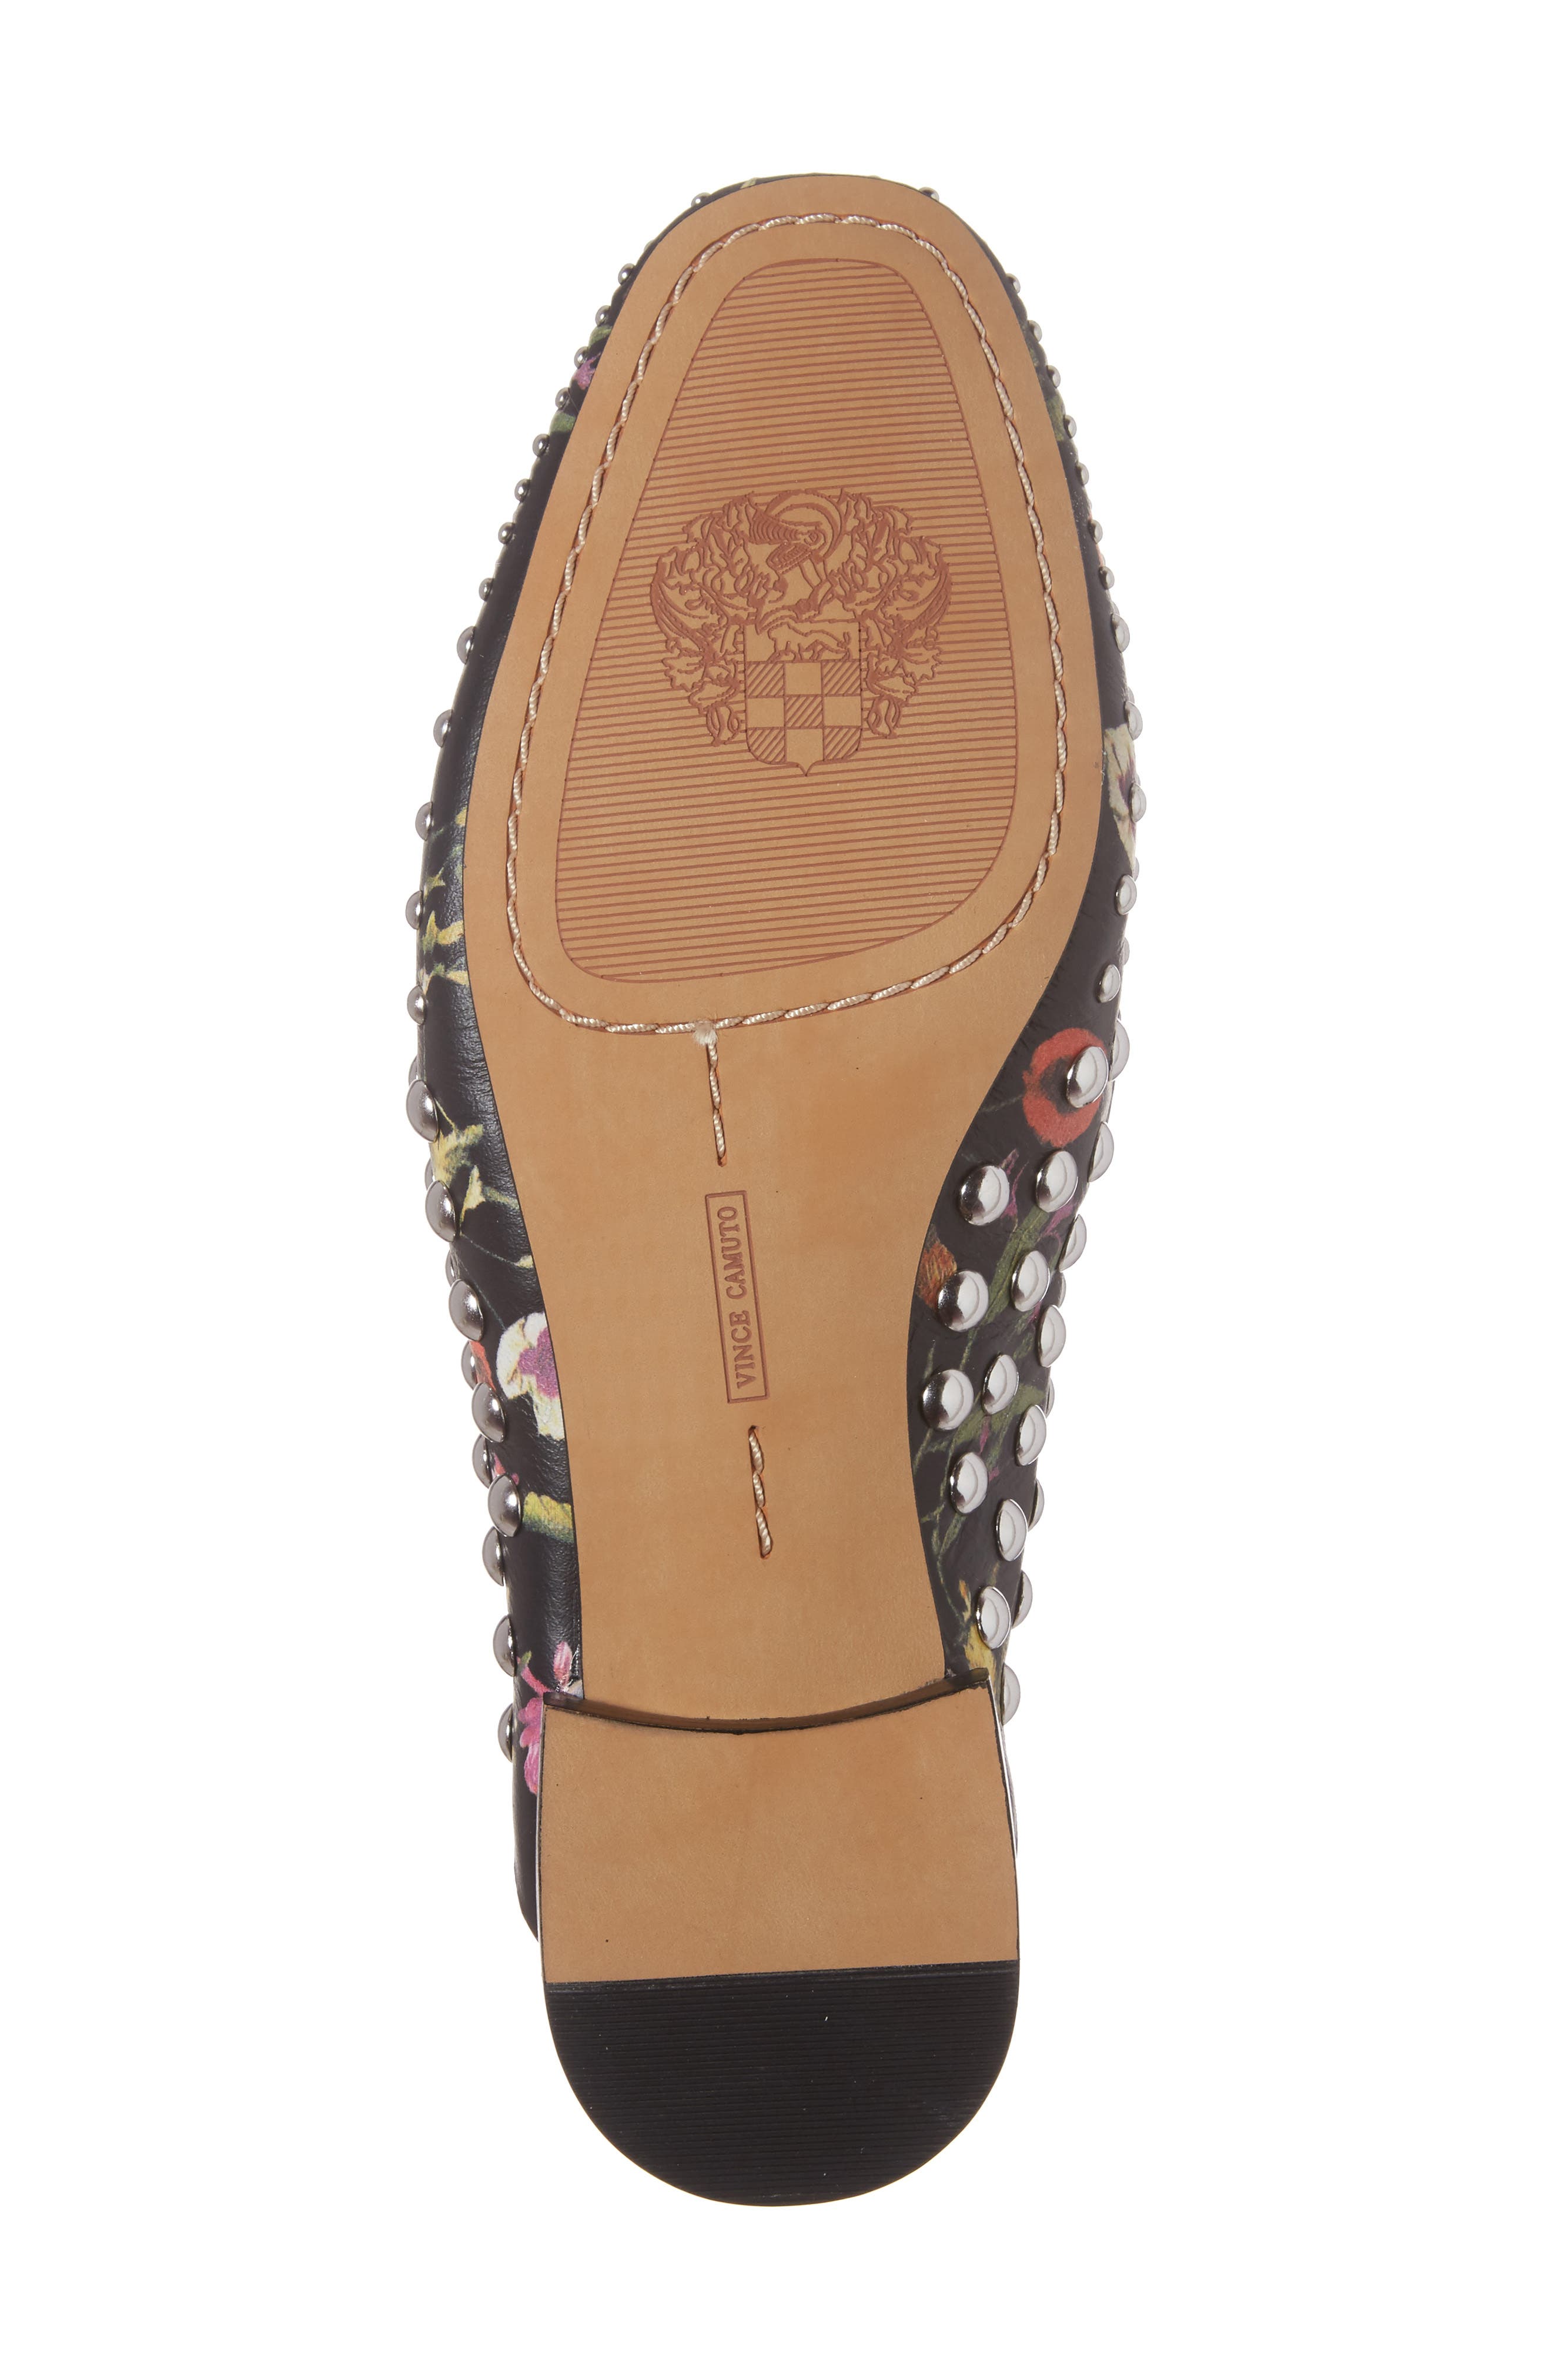 vince camuto studded mules